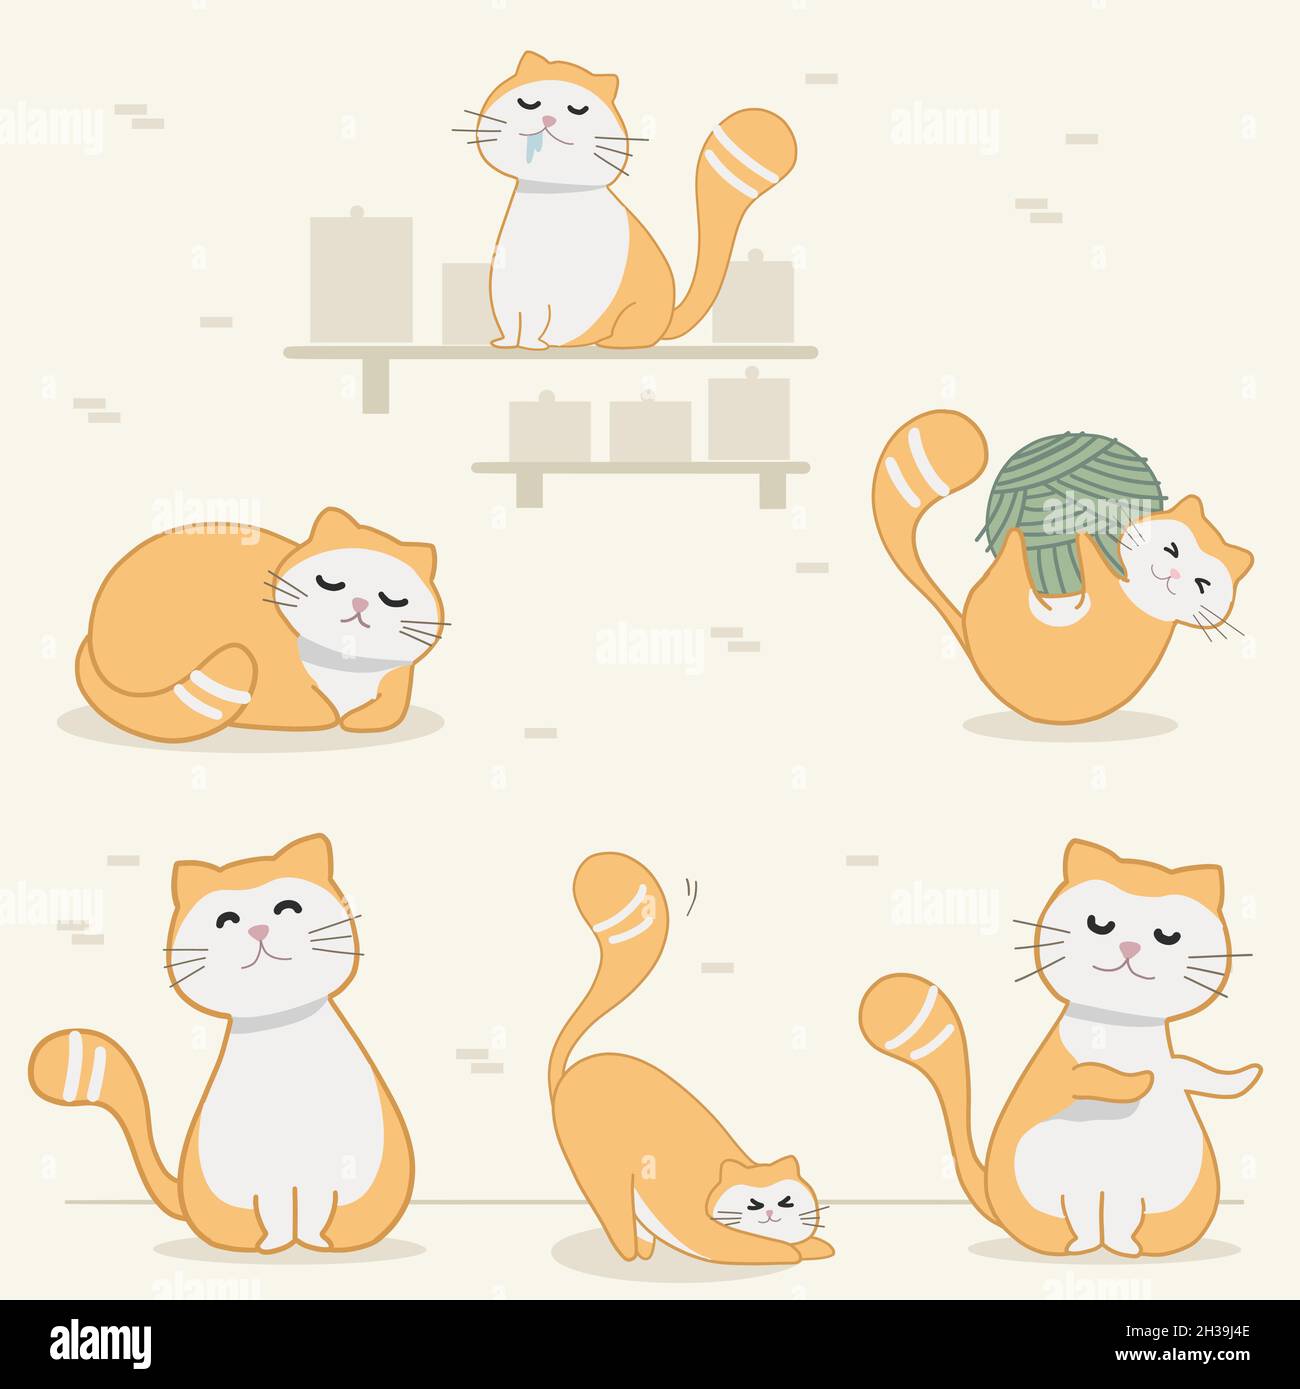 Cats in different positions playing and having fun. Small little pet kittens purring and jumping around. Big set of cat illustrations. Stock Vector